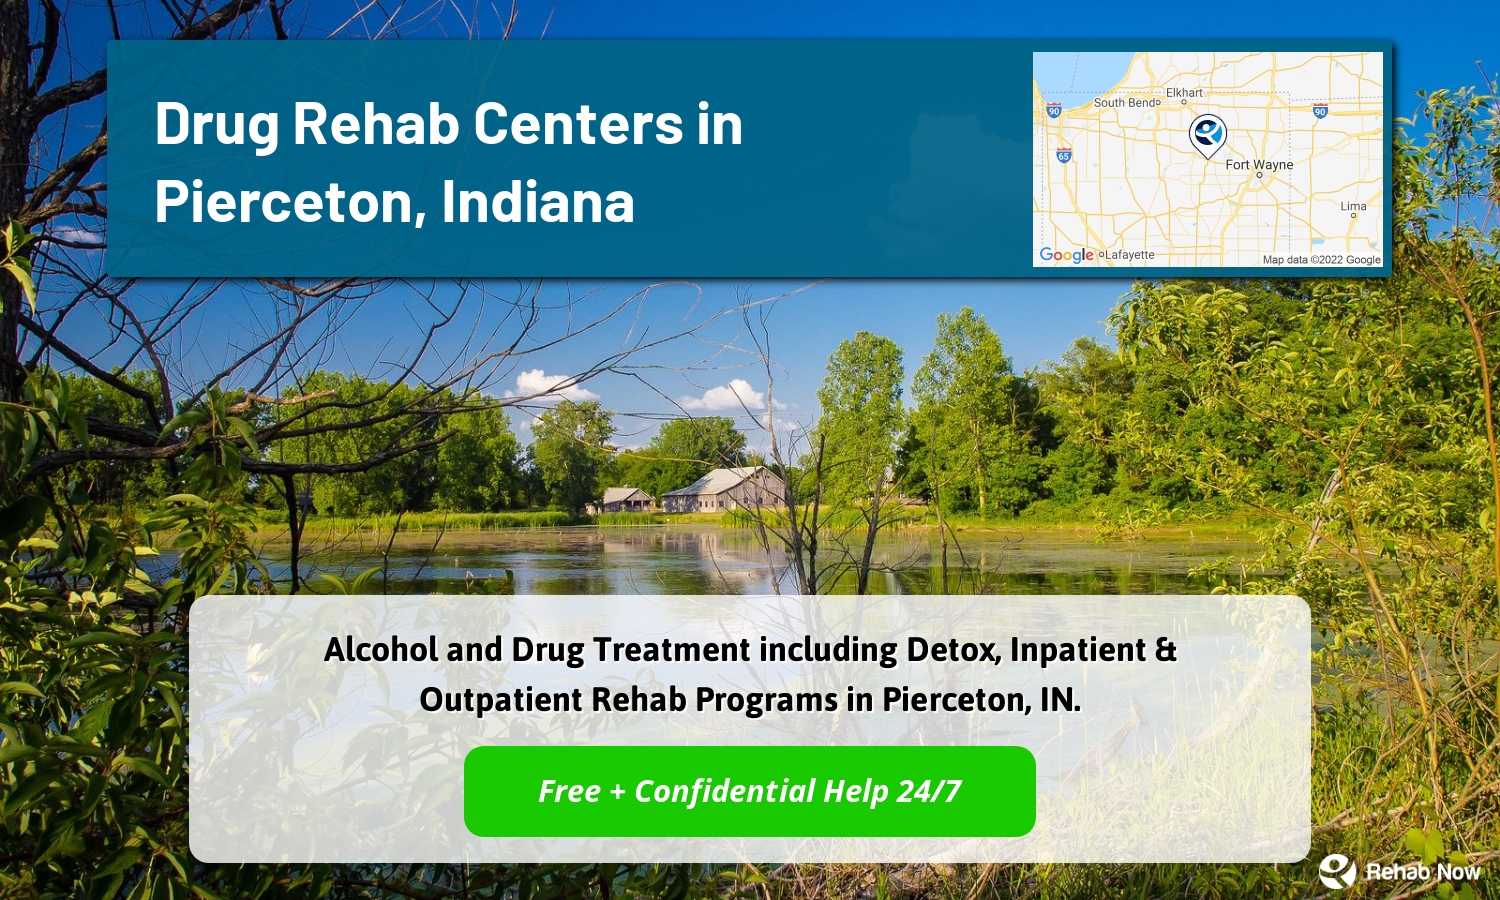 Alcohol and Drug Treatment including Detox, Inpatient & Outpatient Rehab Programs in Pierceton, IN.